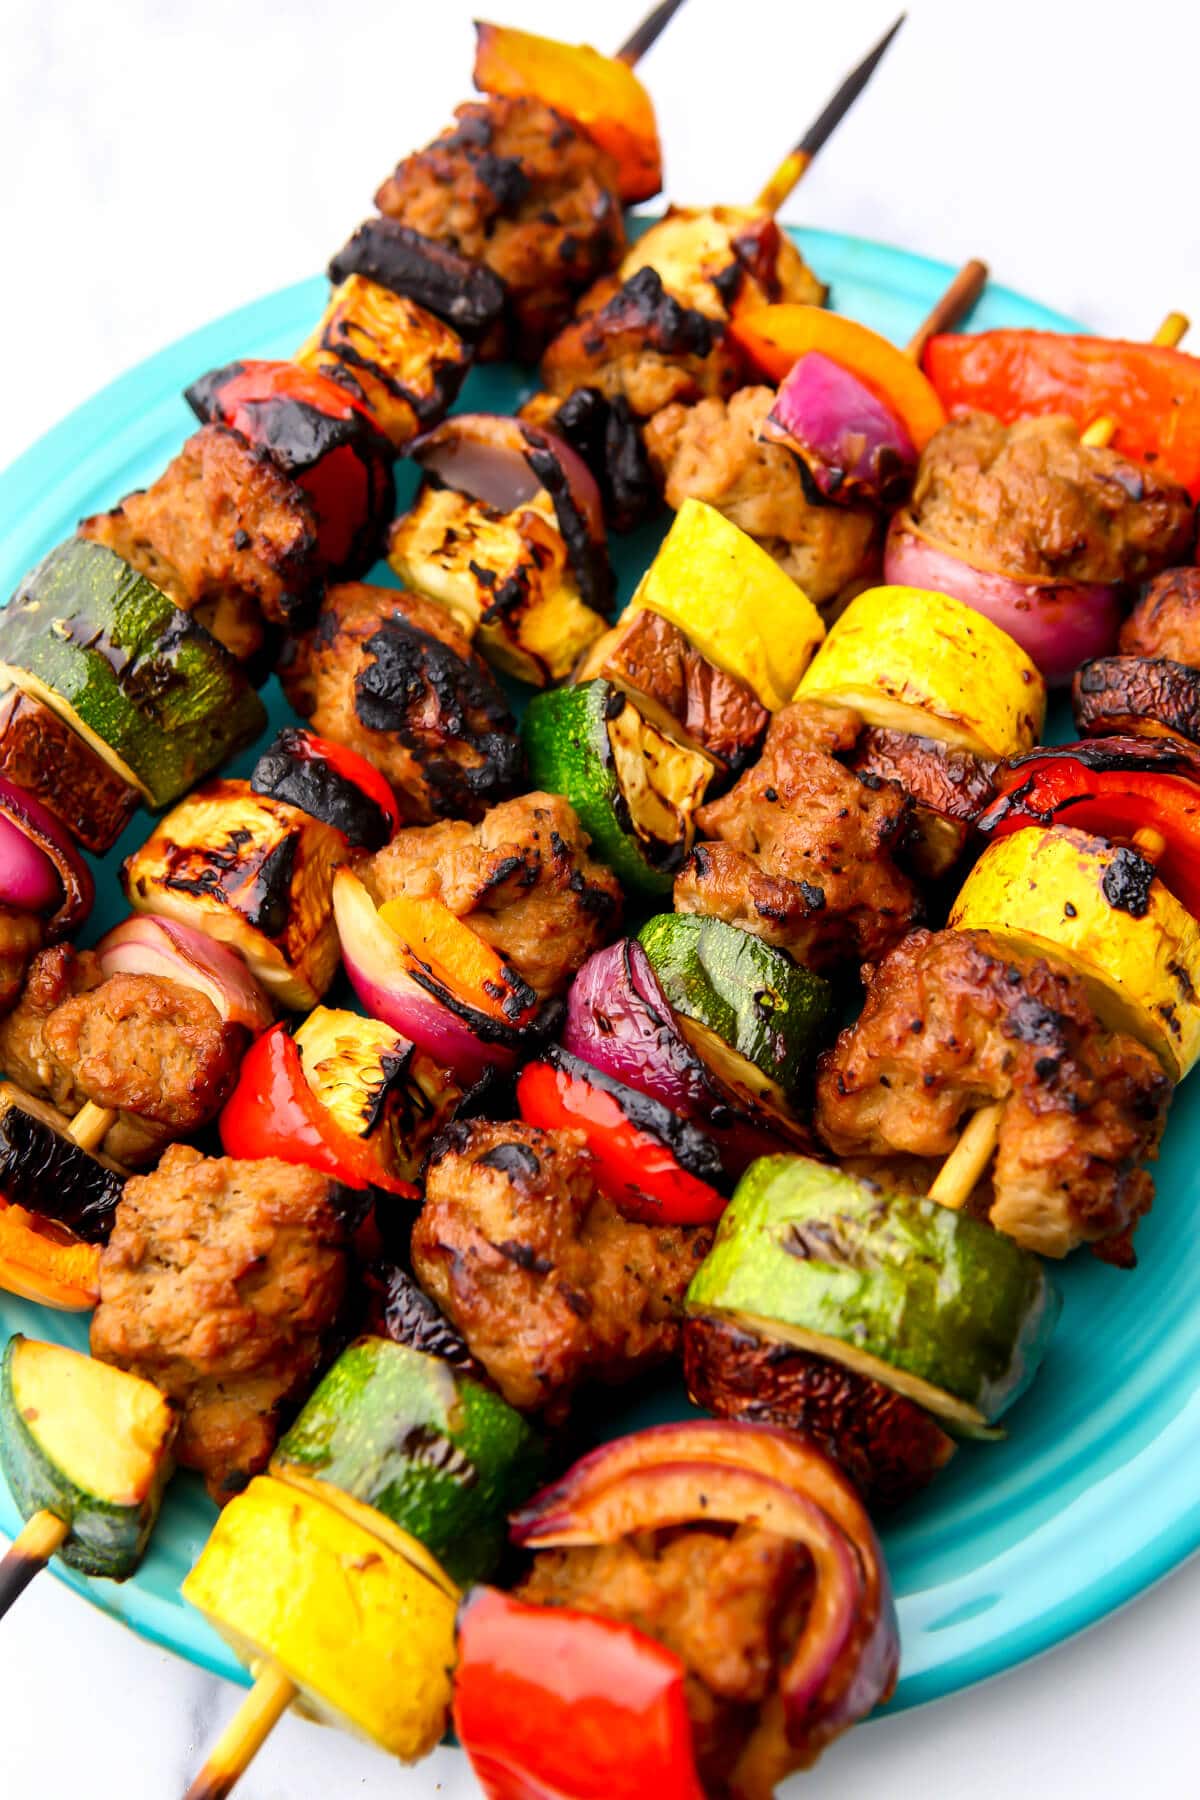 A blue plate filled with colorful vegan kebabs filled with seitan and grilled veggies.